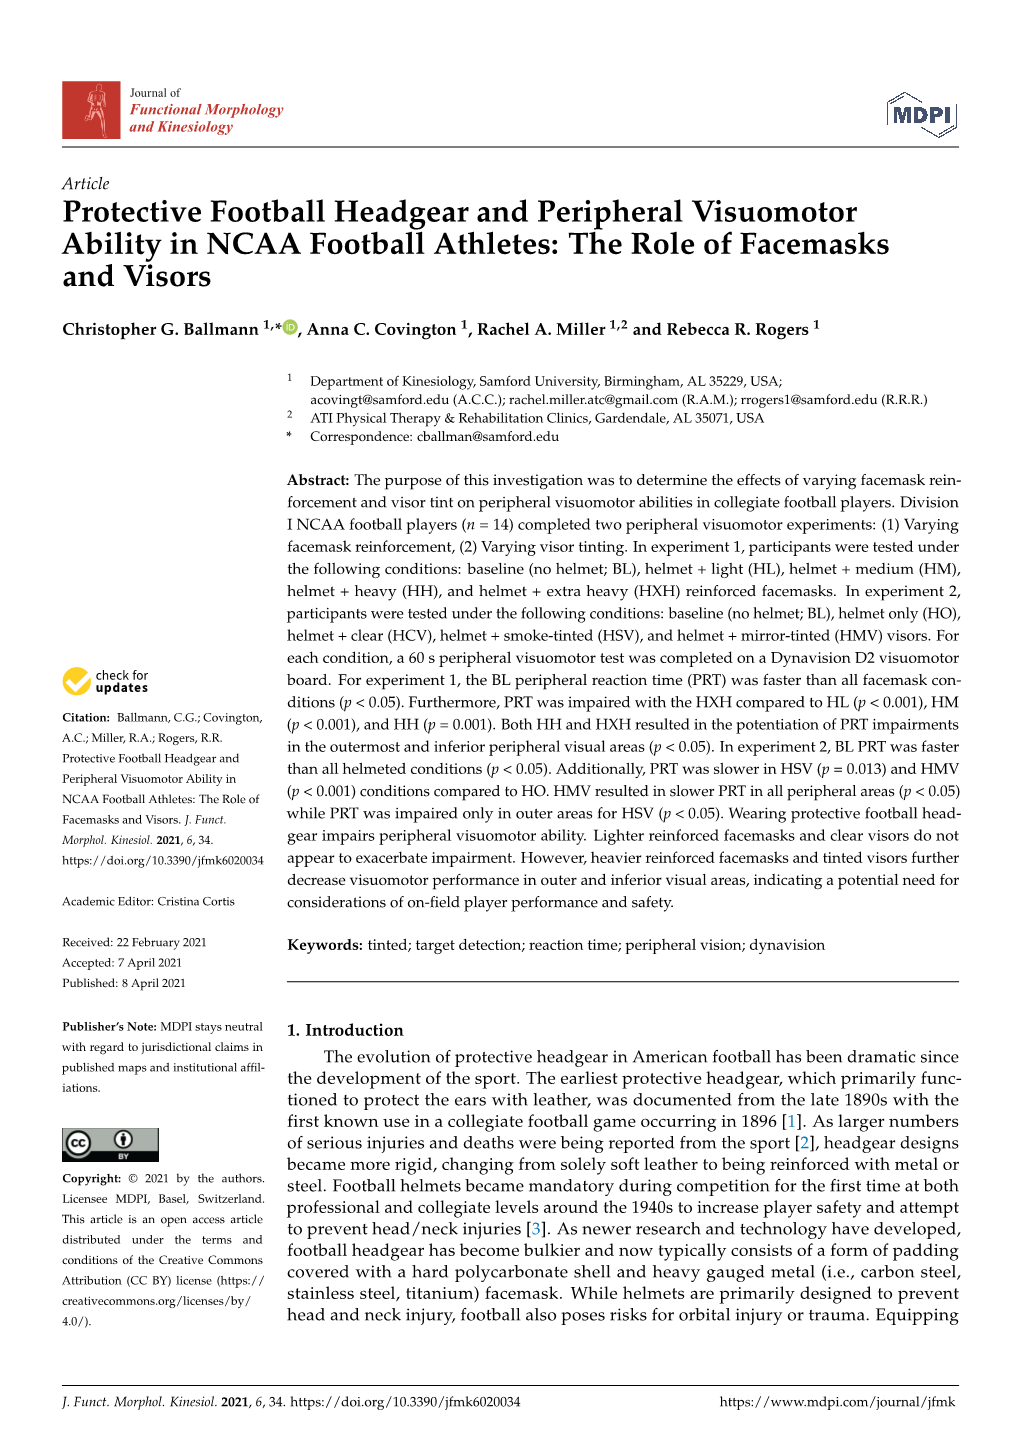 Protective Football Headgear and Peripheral Visuomotor Ability in NCAA Football Athletes: the Role of Facemasks and Visors